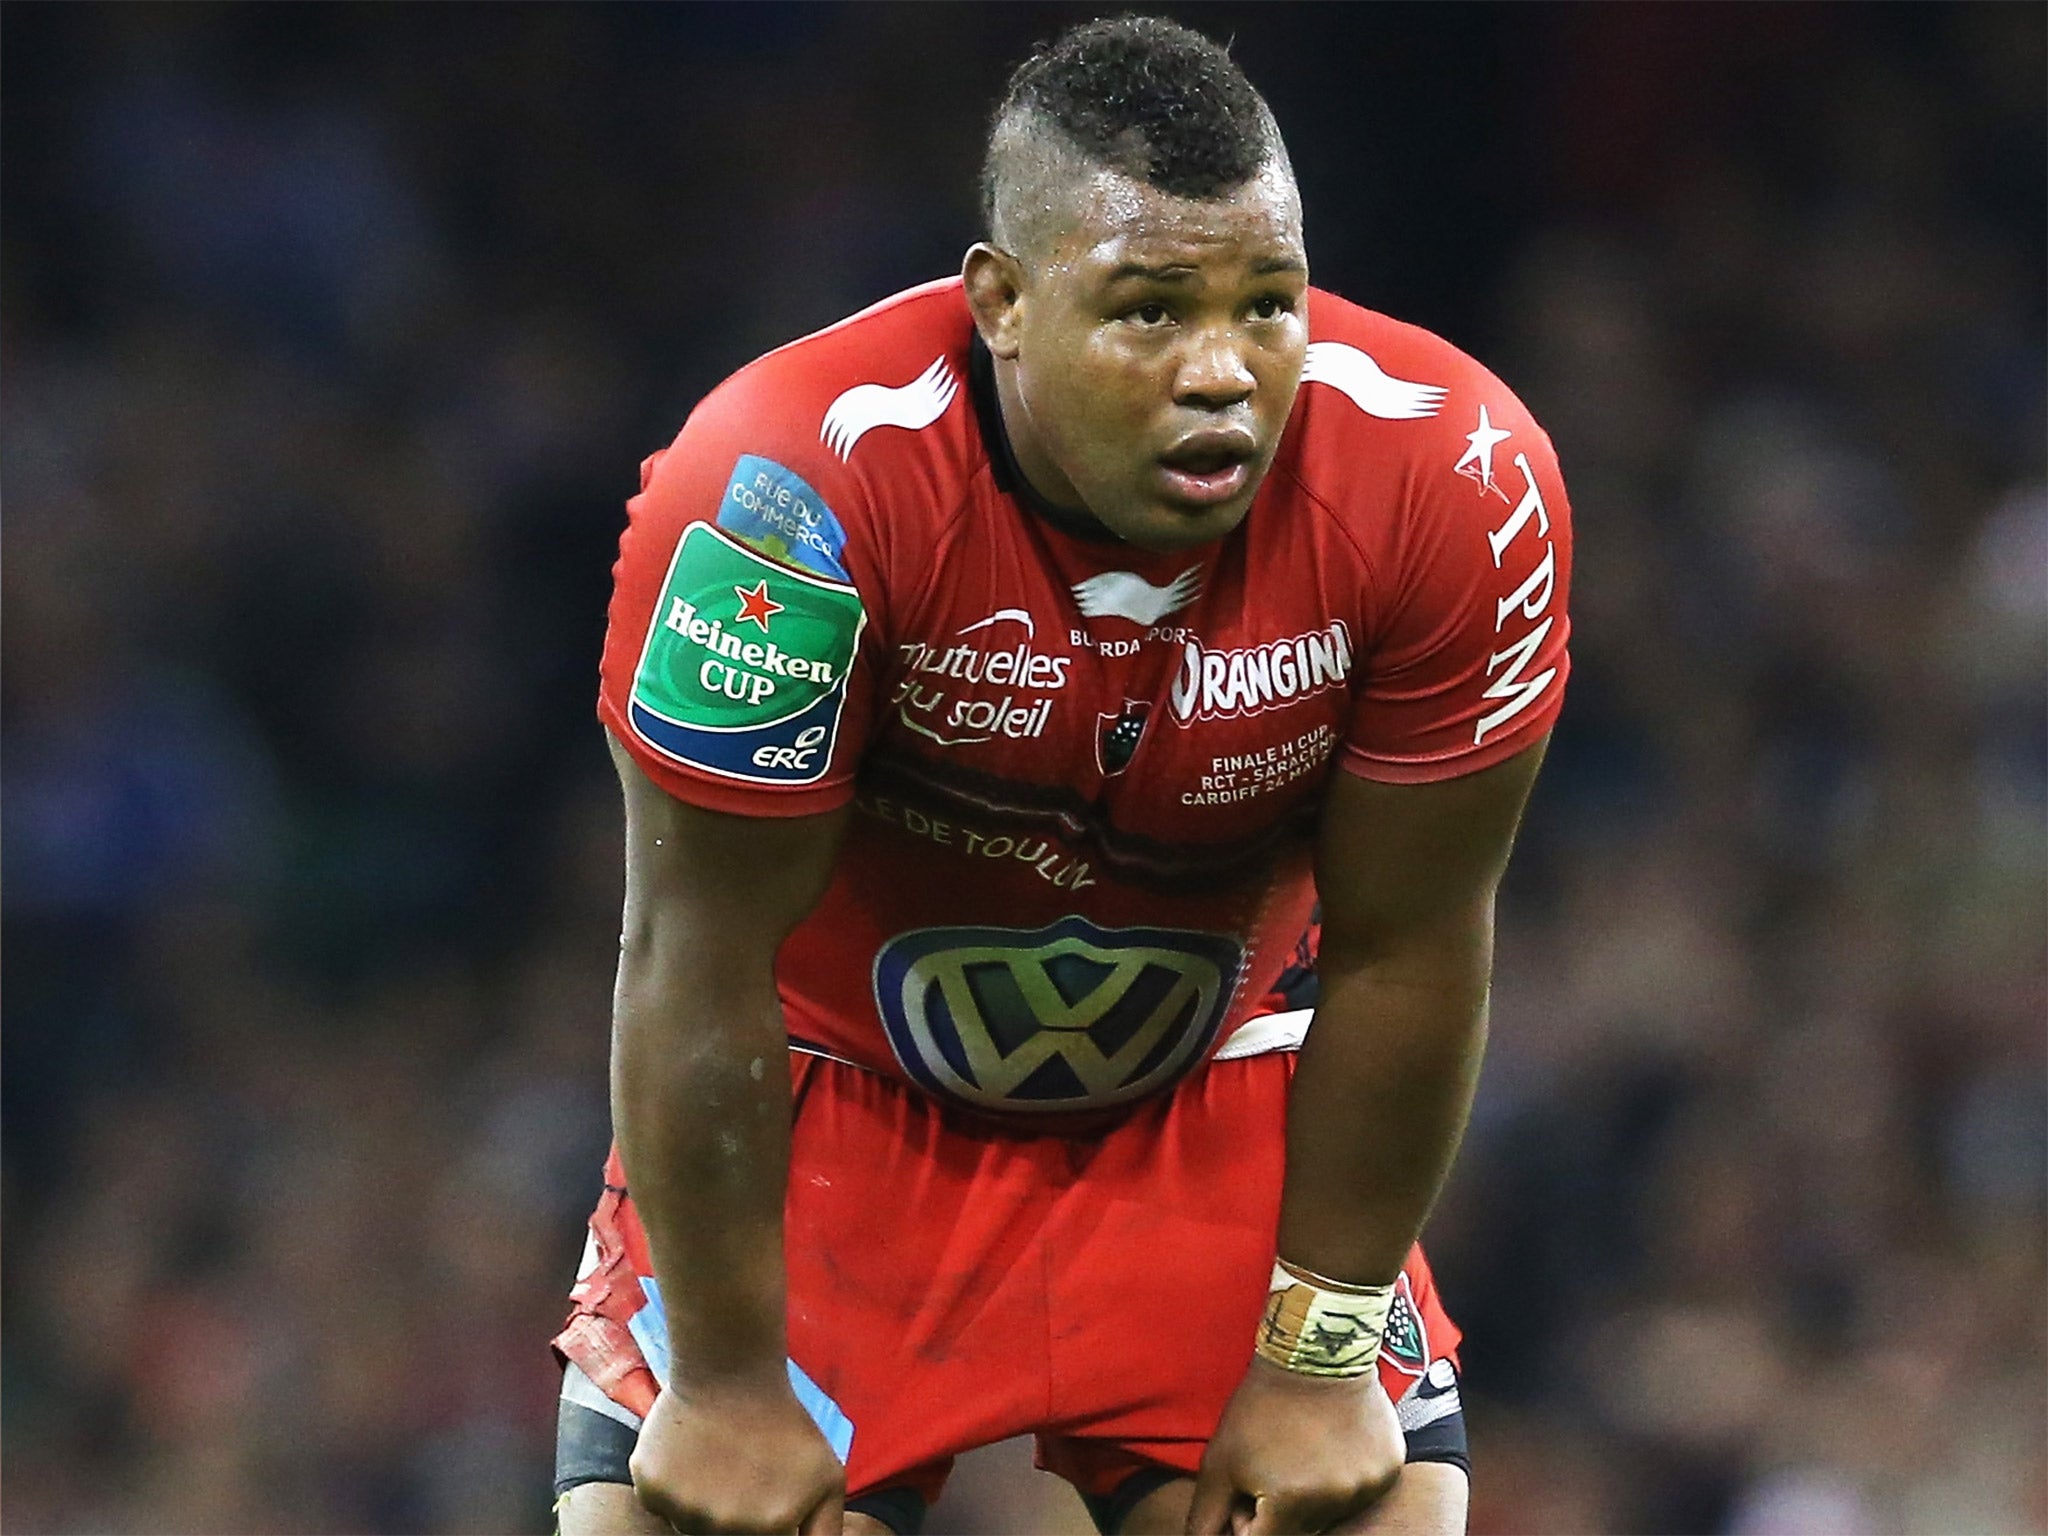 Steffon Armitage is known as ‘the Lionel Messi of rugby’